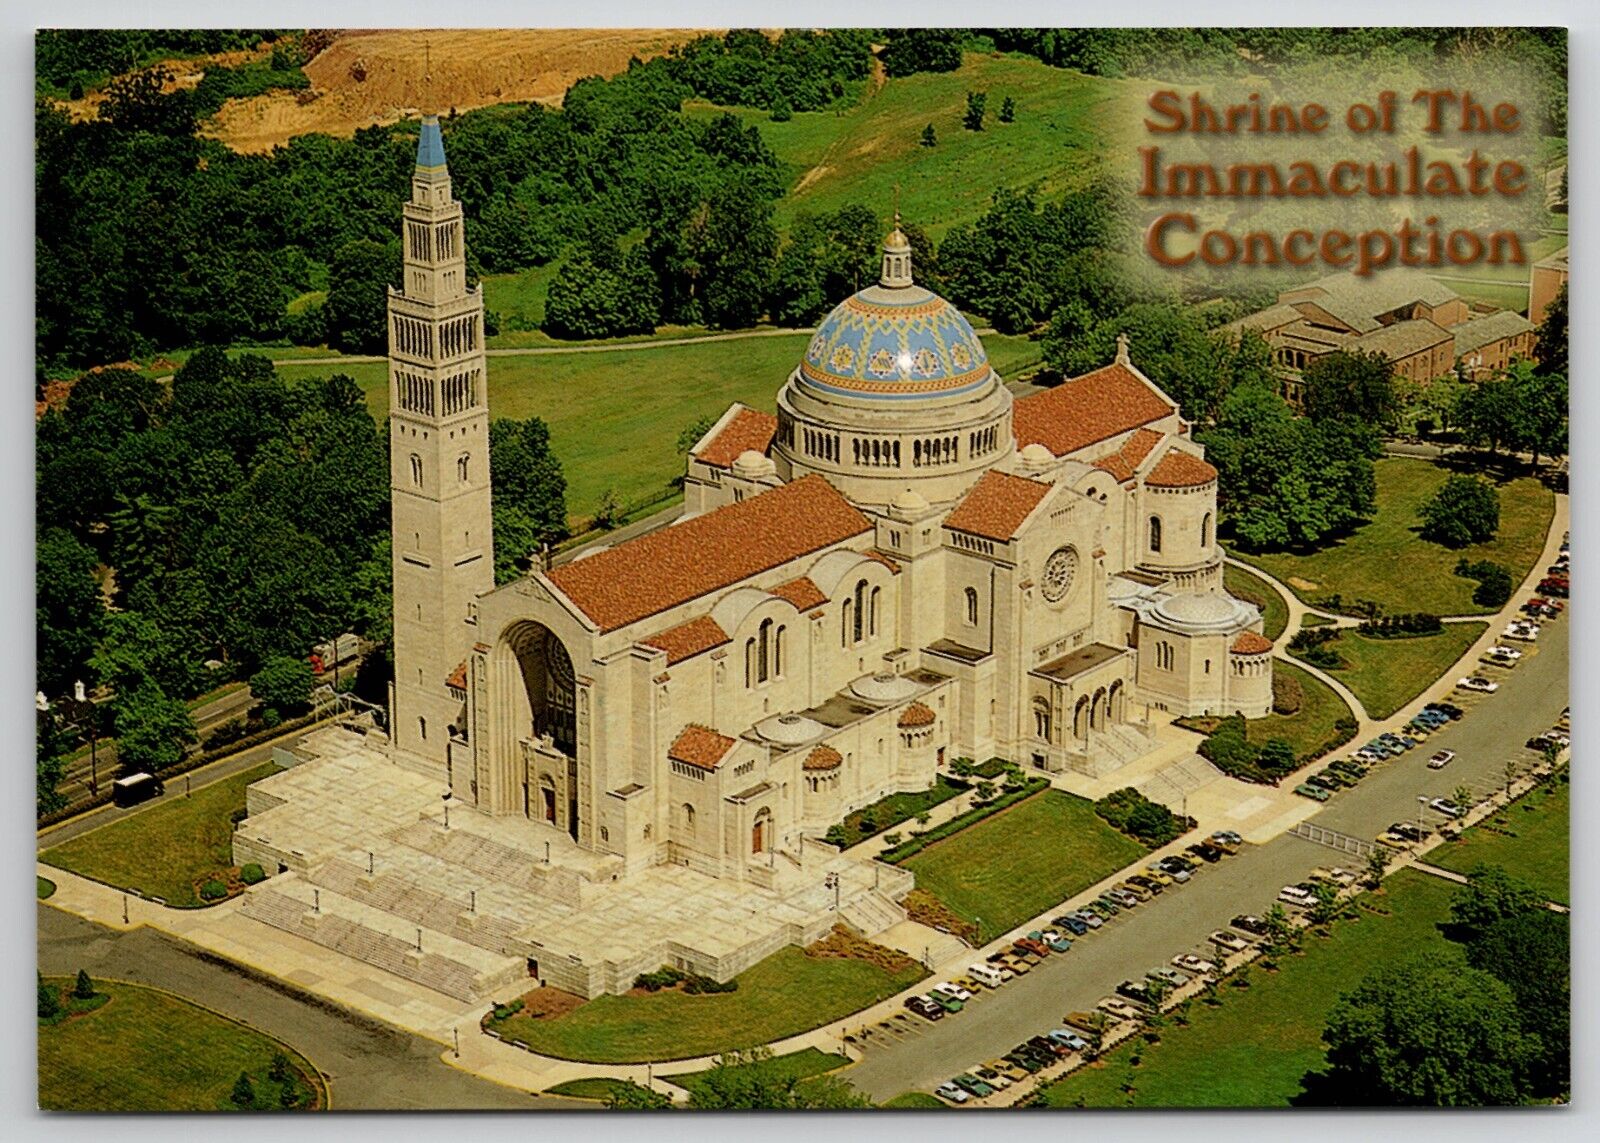 Washington DC THE SHRINE OF THE IMMACULATE CONCEPTION Aerial View - POSTCARD